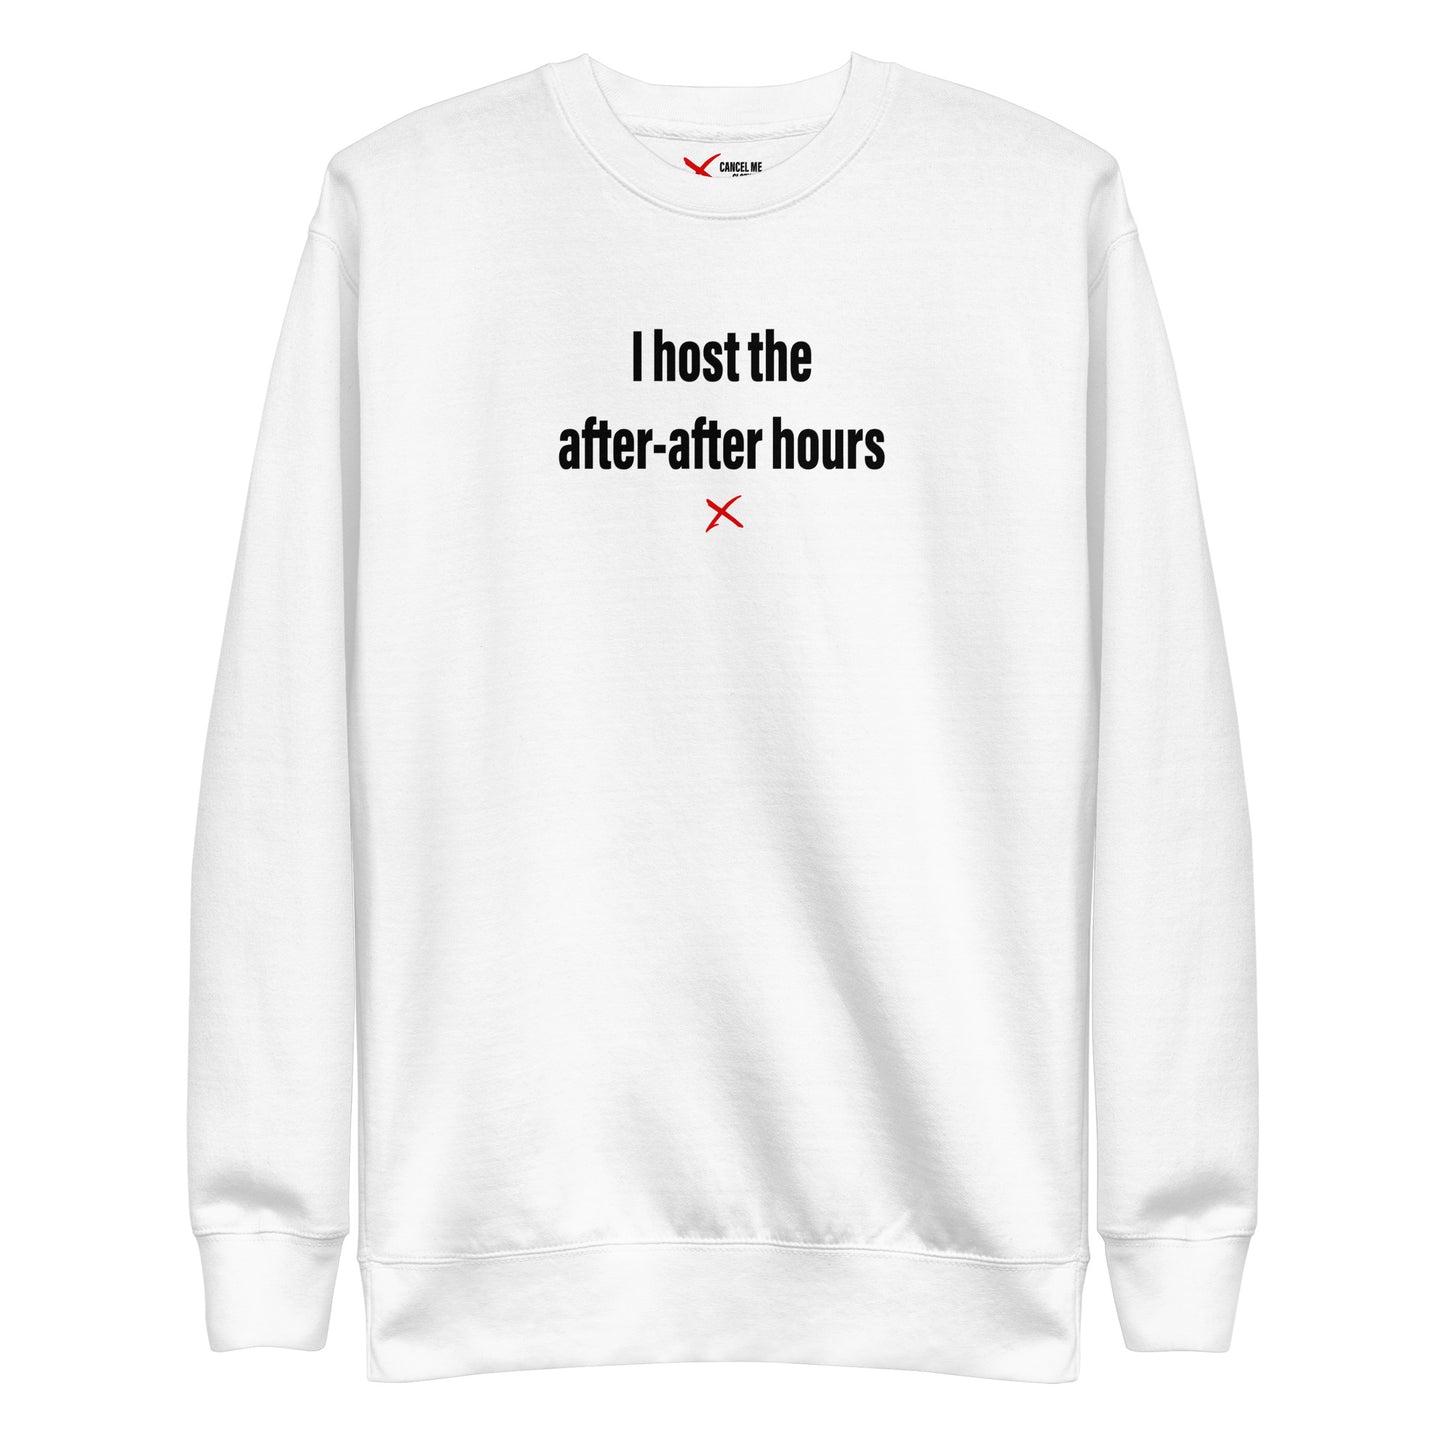 I host the after-after hours - Sweatshirt